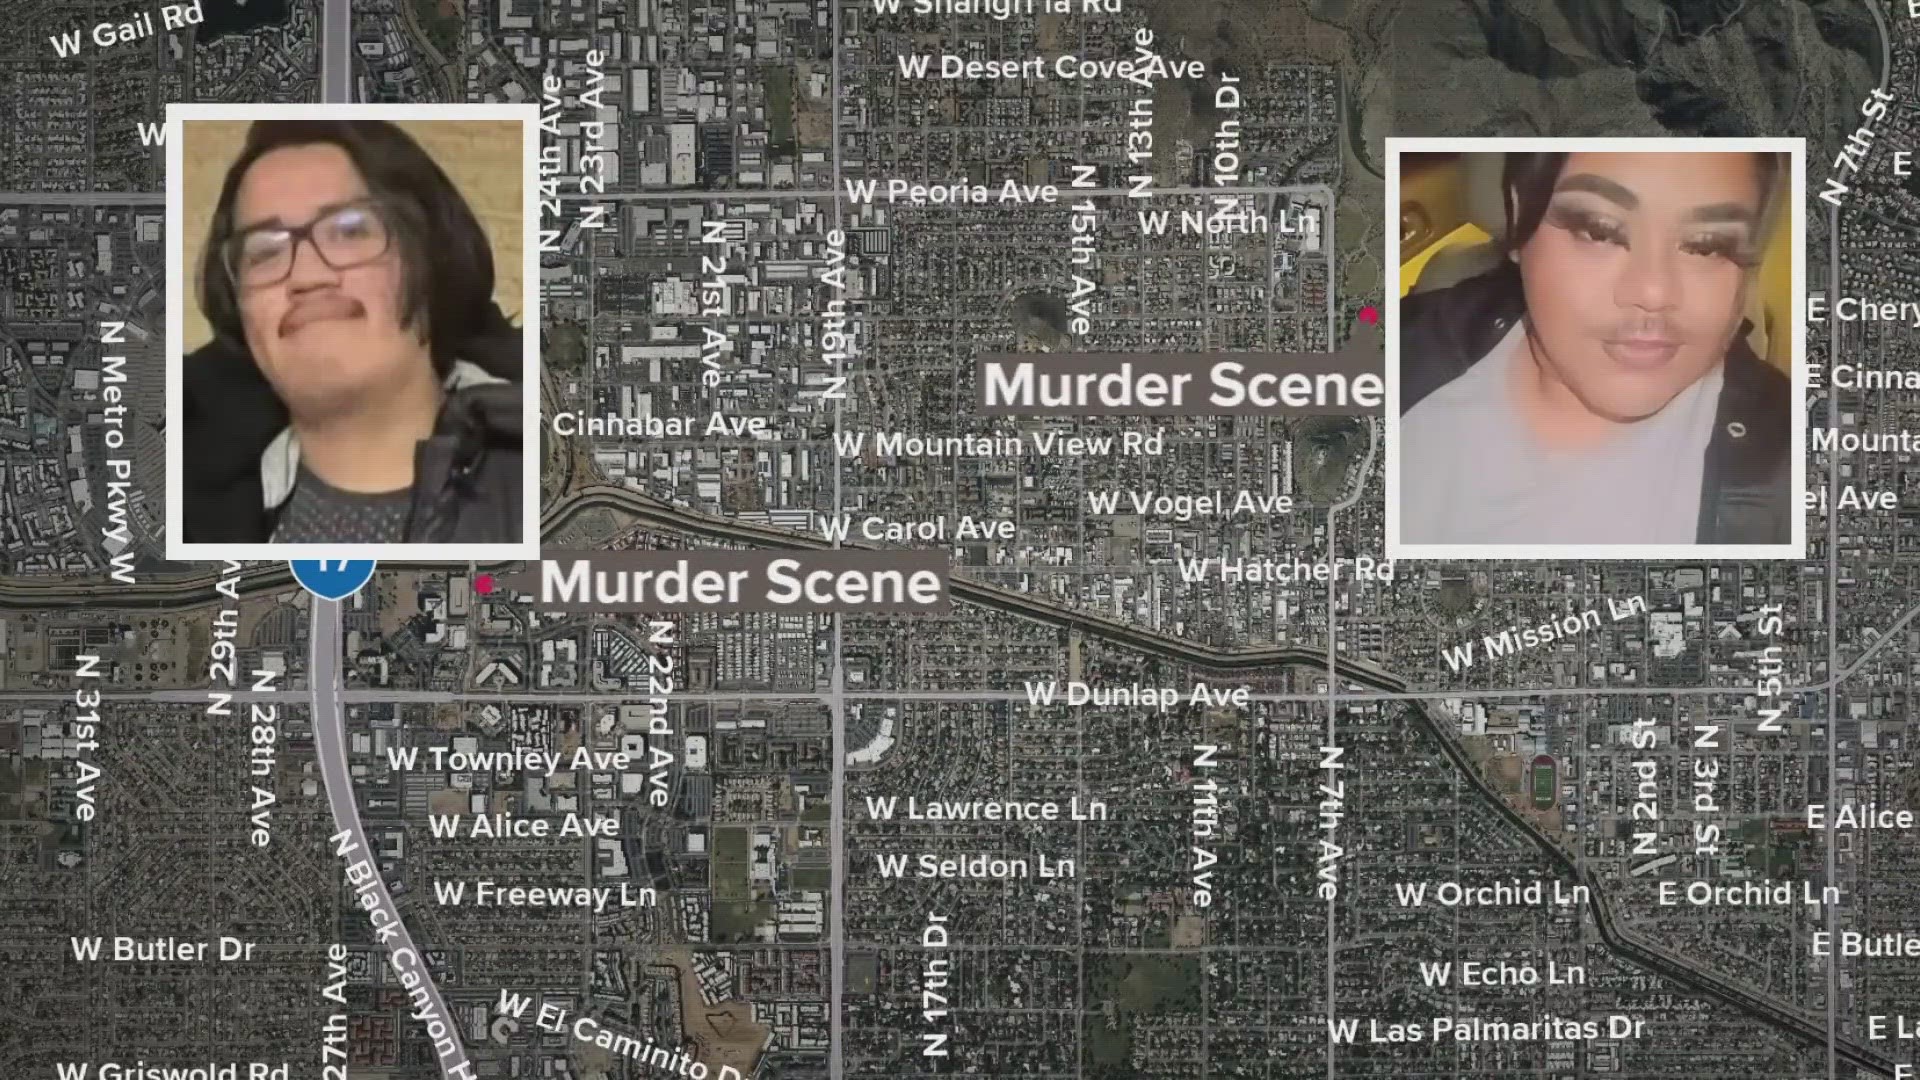 Two horrific murders shook a Valley neighborhood this year. Police say the murders are connected.